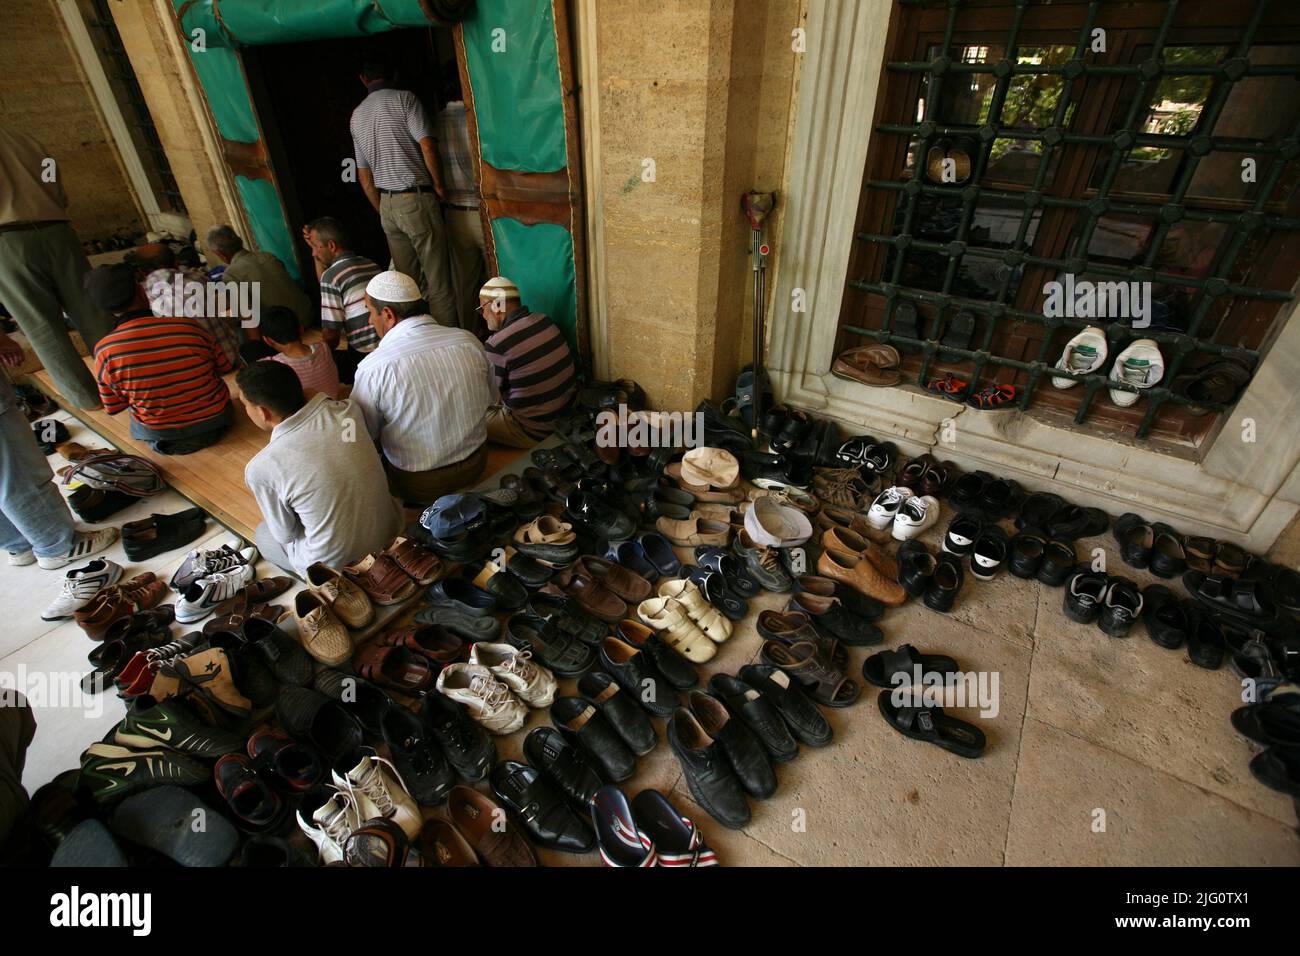 Kırkpınar (Turkish Oil Wrestling). Shoes left next to the entrance during the Friday prayer (Jumu'ah) in the Selimiye Mosque in Edirne, Turkey. The congregational prayer in the Selimiye Mosque marks the beginning of the 648th annual Kırkpınar Tournament on 2 July 2009. The annual tournament in Turkish oil wrestling traditionally starts with the Friday prayer in the Selimiye Mosque designed by Ottoman imperial architect Mimar Sinan and built between 1568 and 1575. Some people pray outside because the mosque is full already. Stock Photo